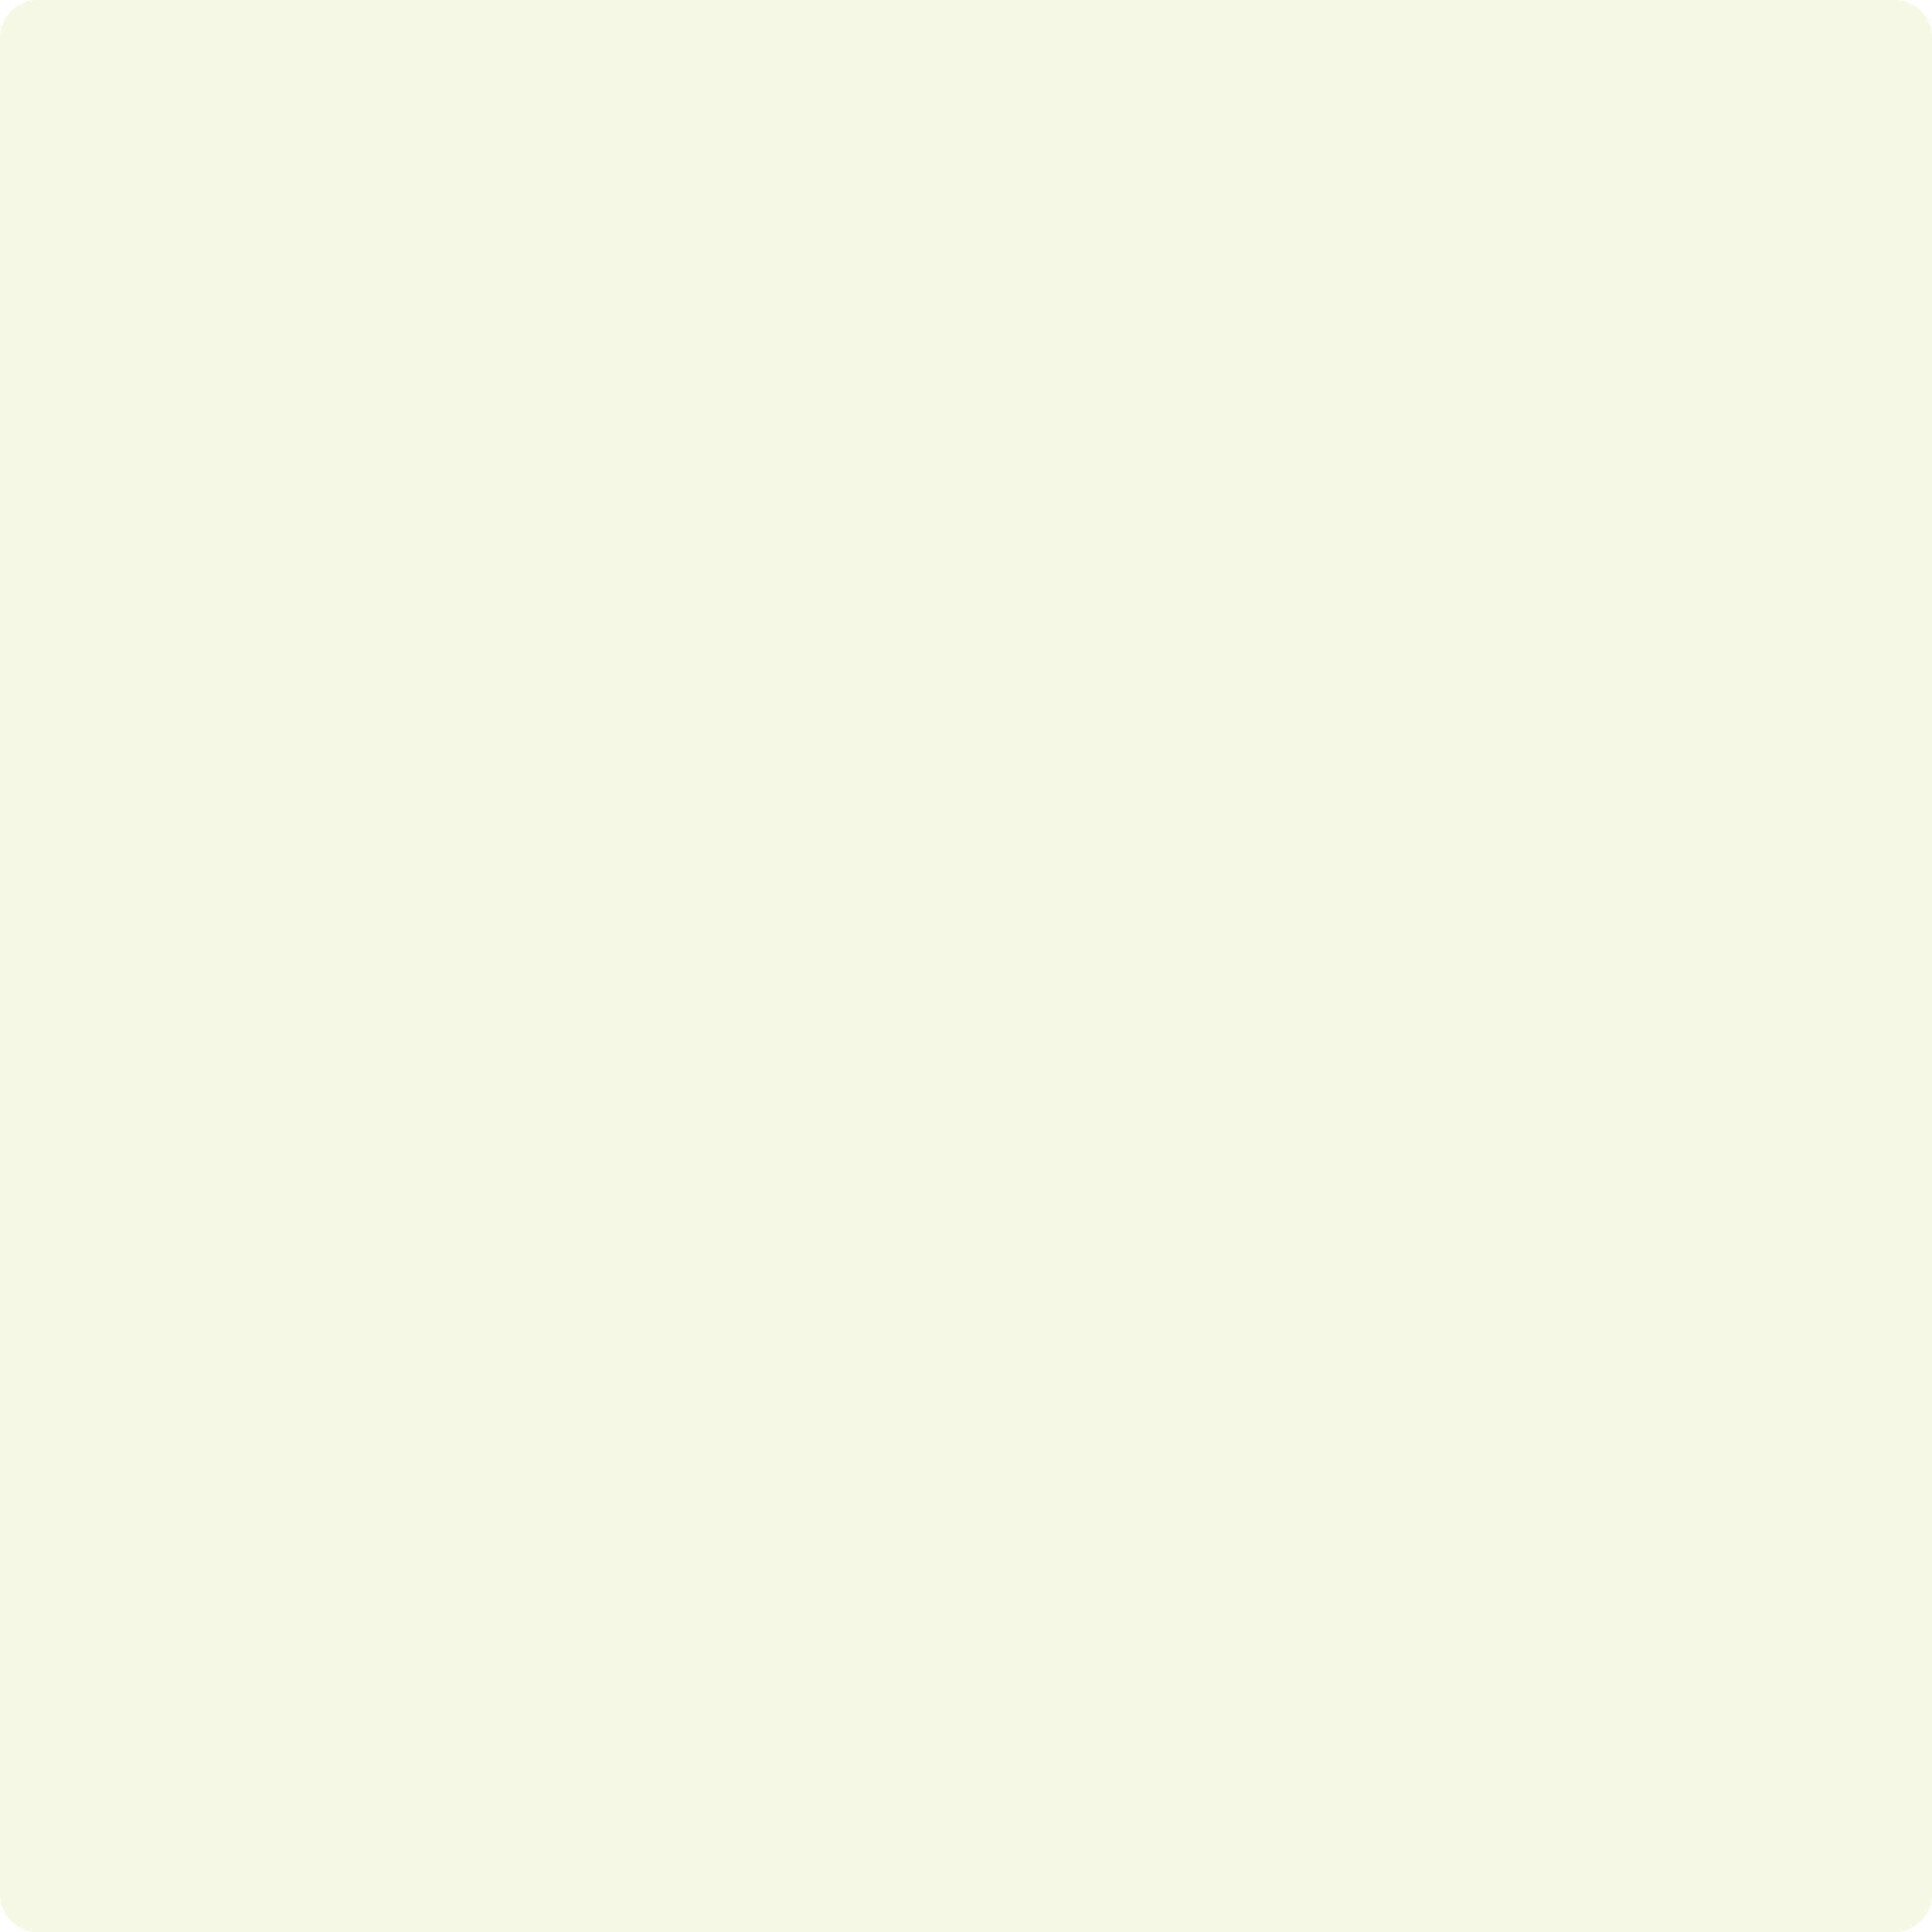 Benjamin Moore 2147-70 Alpine White Precisely Matched For Paint and Spray  Paint